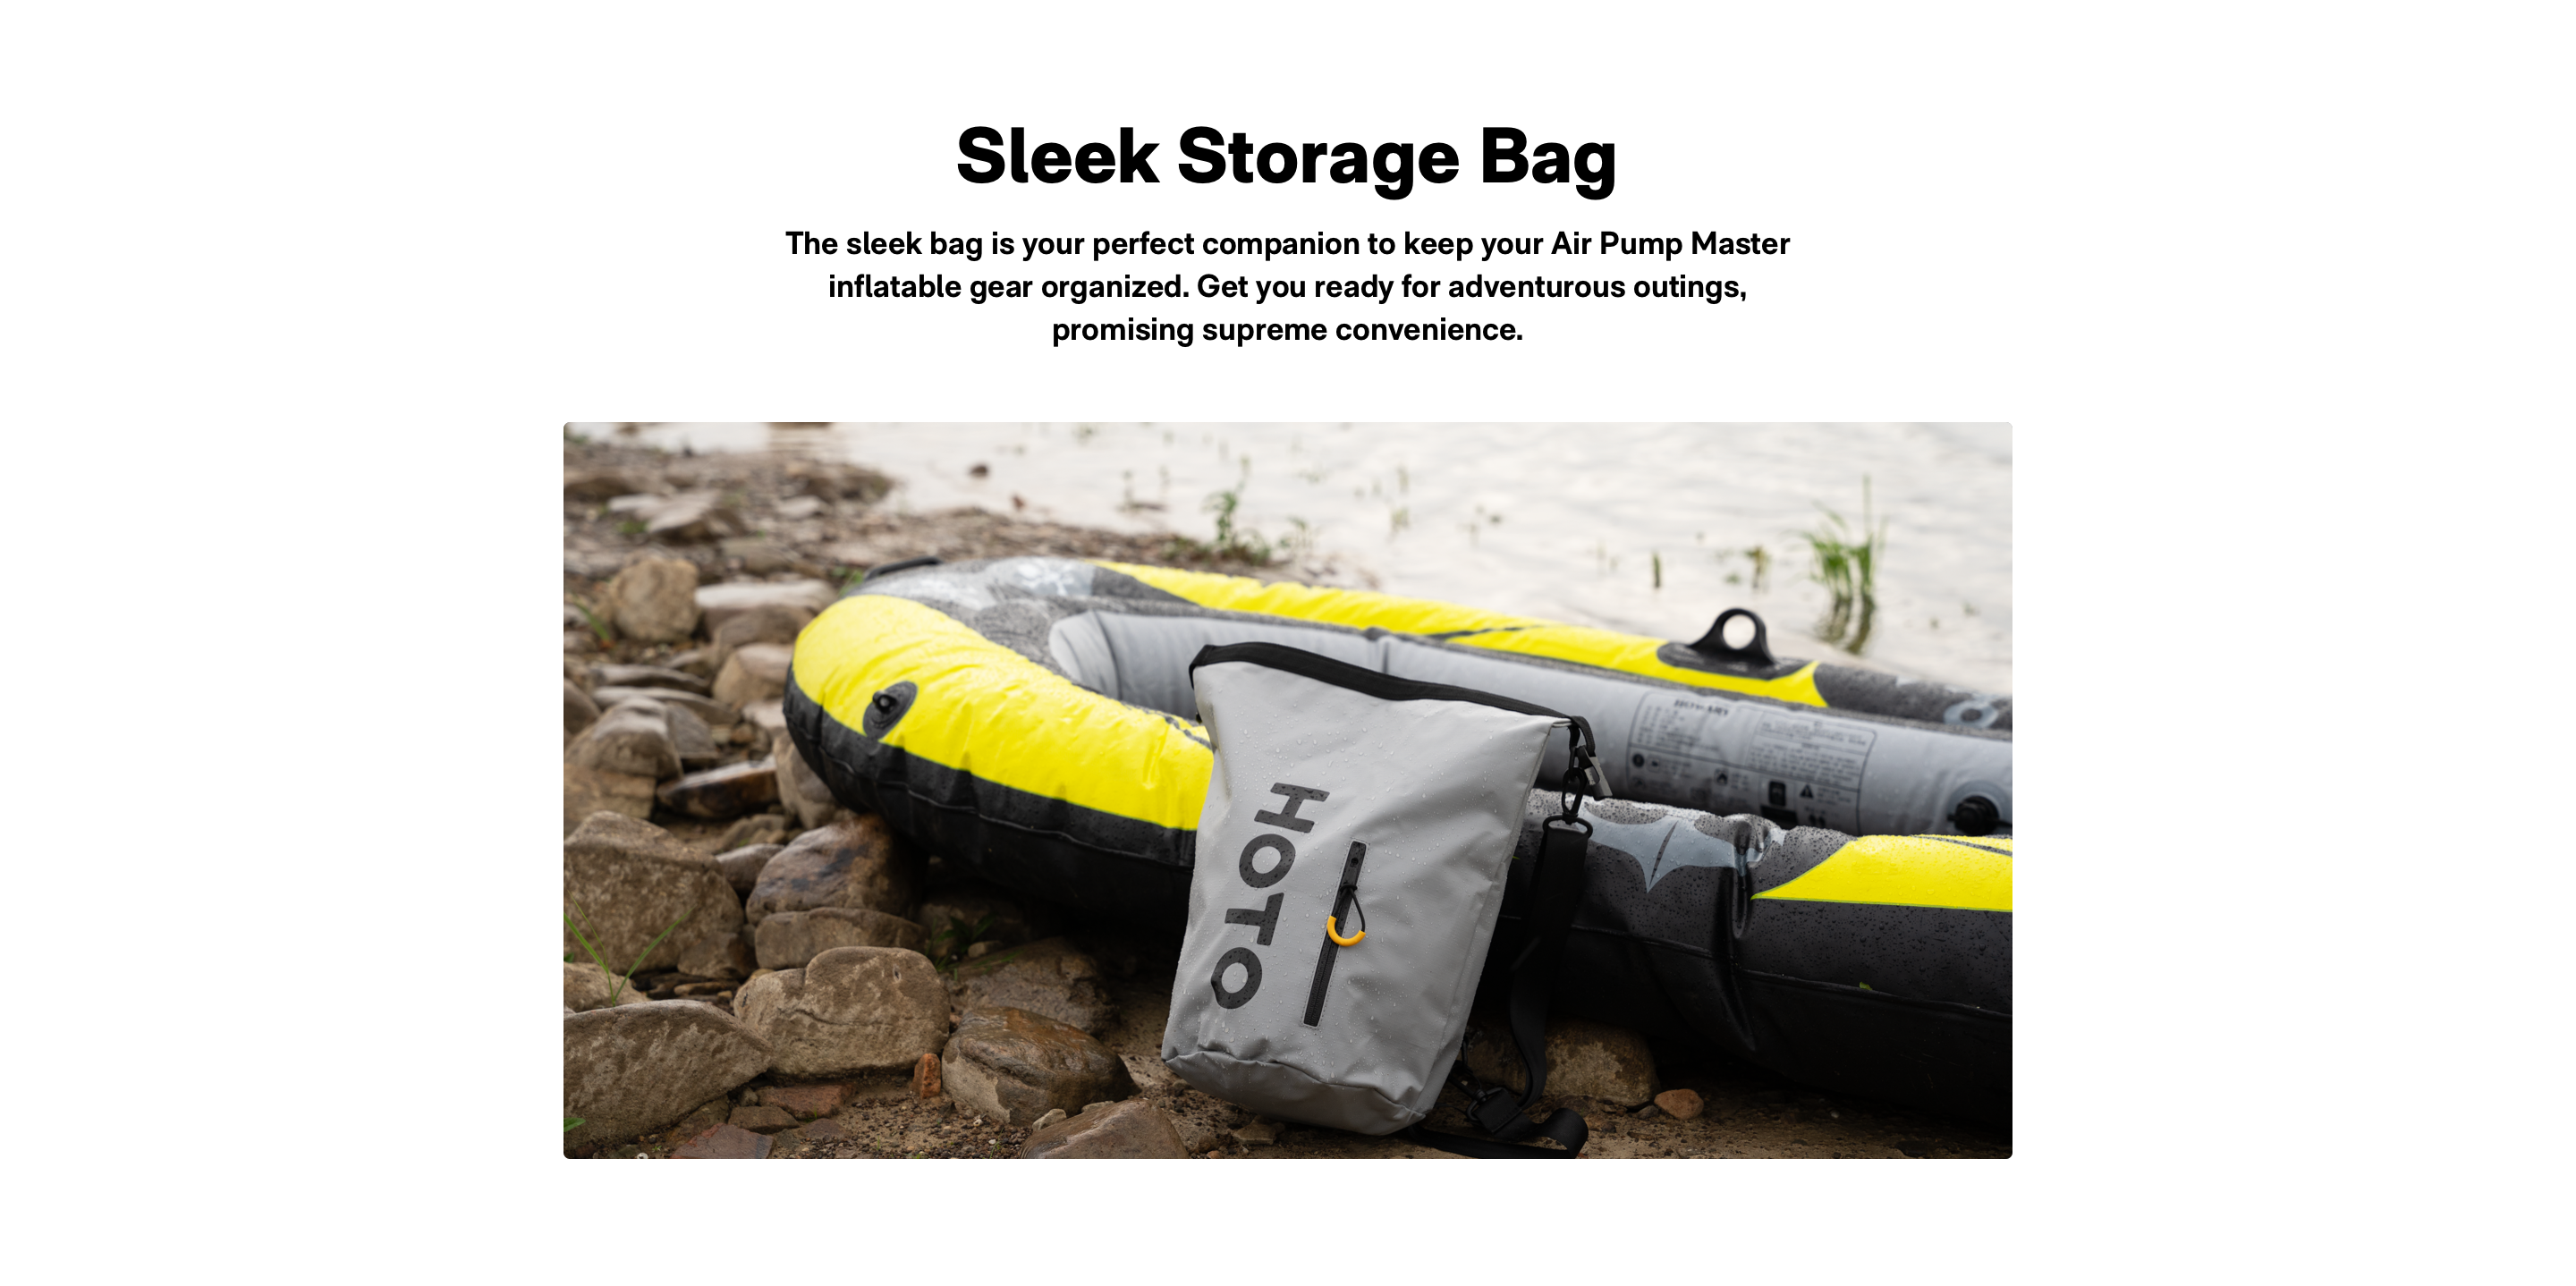 SIeek Storage Bag: The sleek bag is your perfect companion tO keep your Air Pump Master inflatable gear organized. 